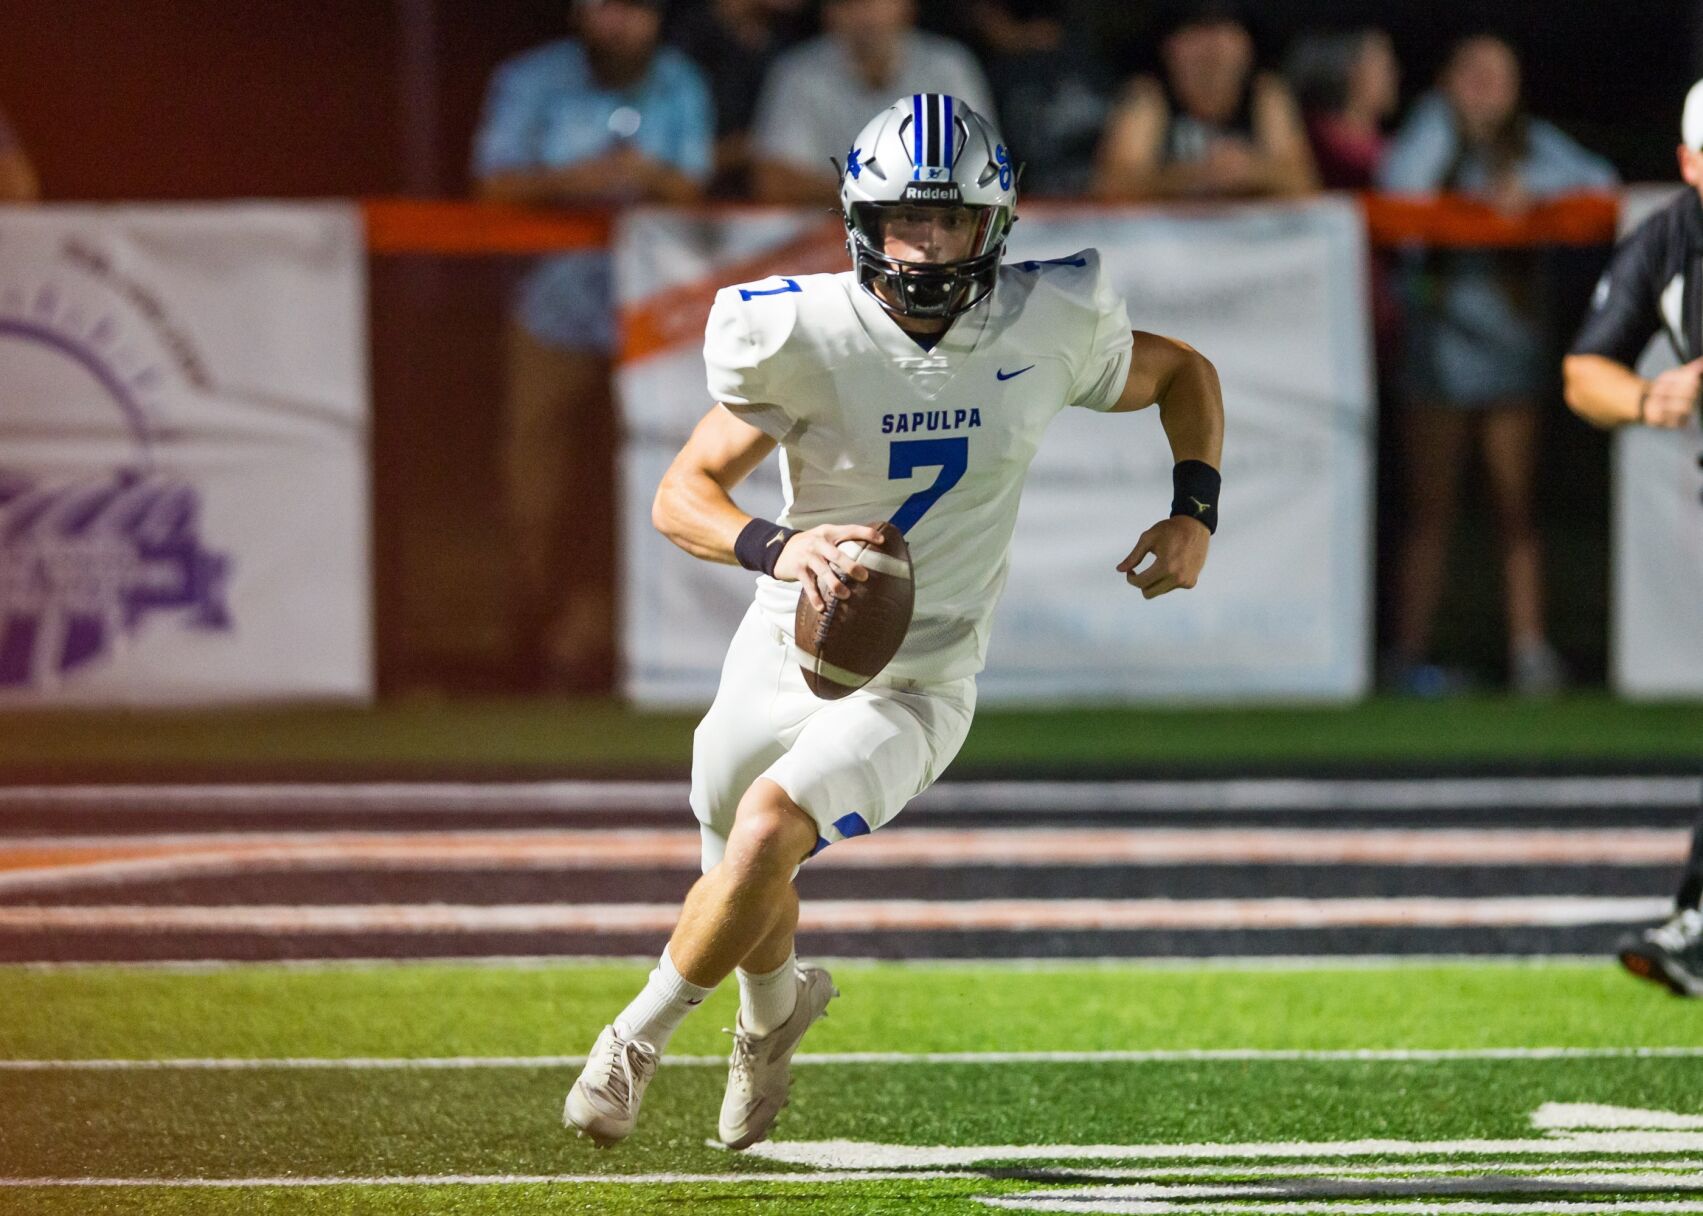 Sapulpa joins 5A rankings while Kelley, Claremore, Collinsville move up